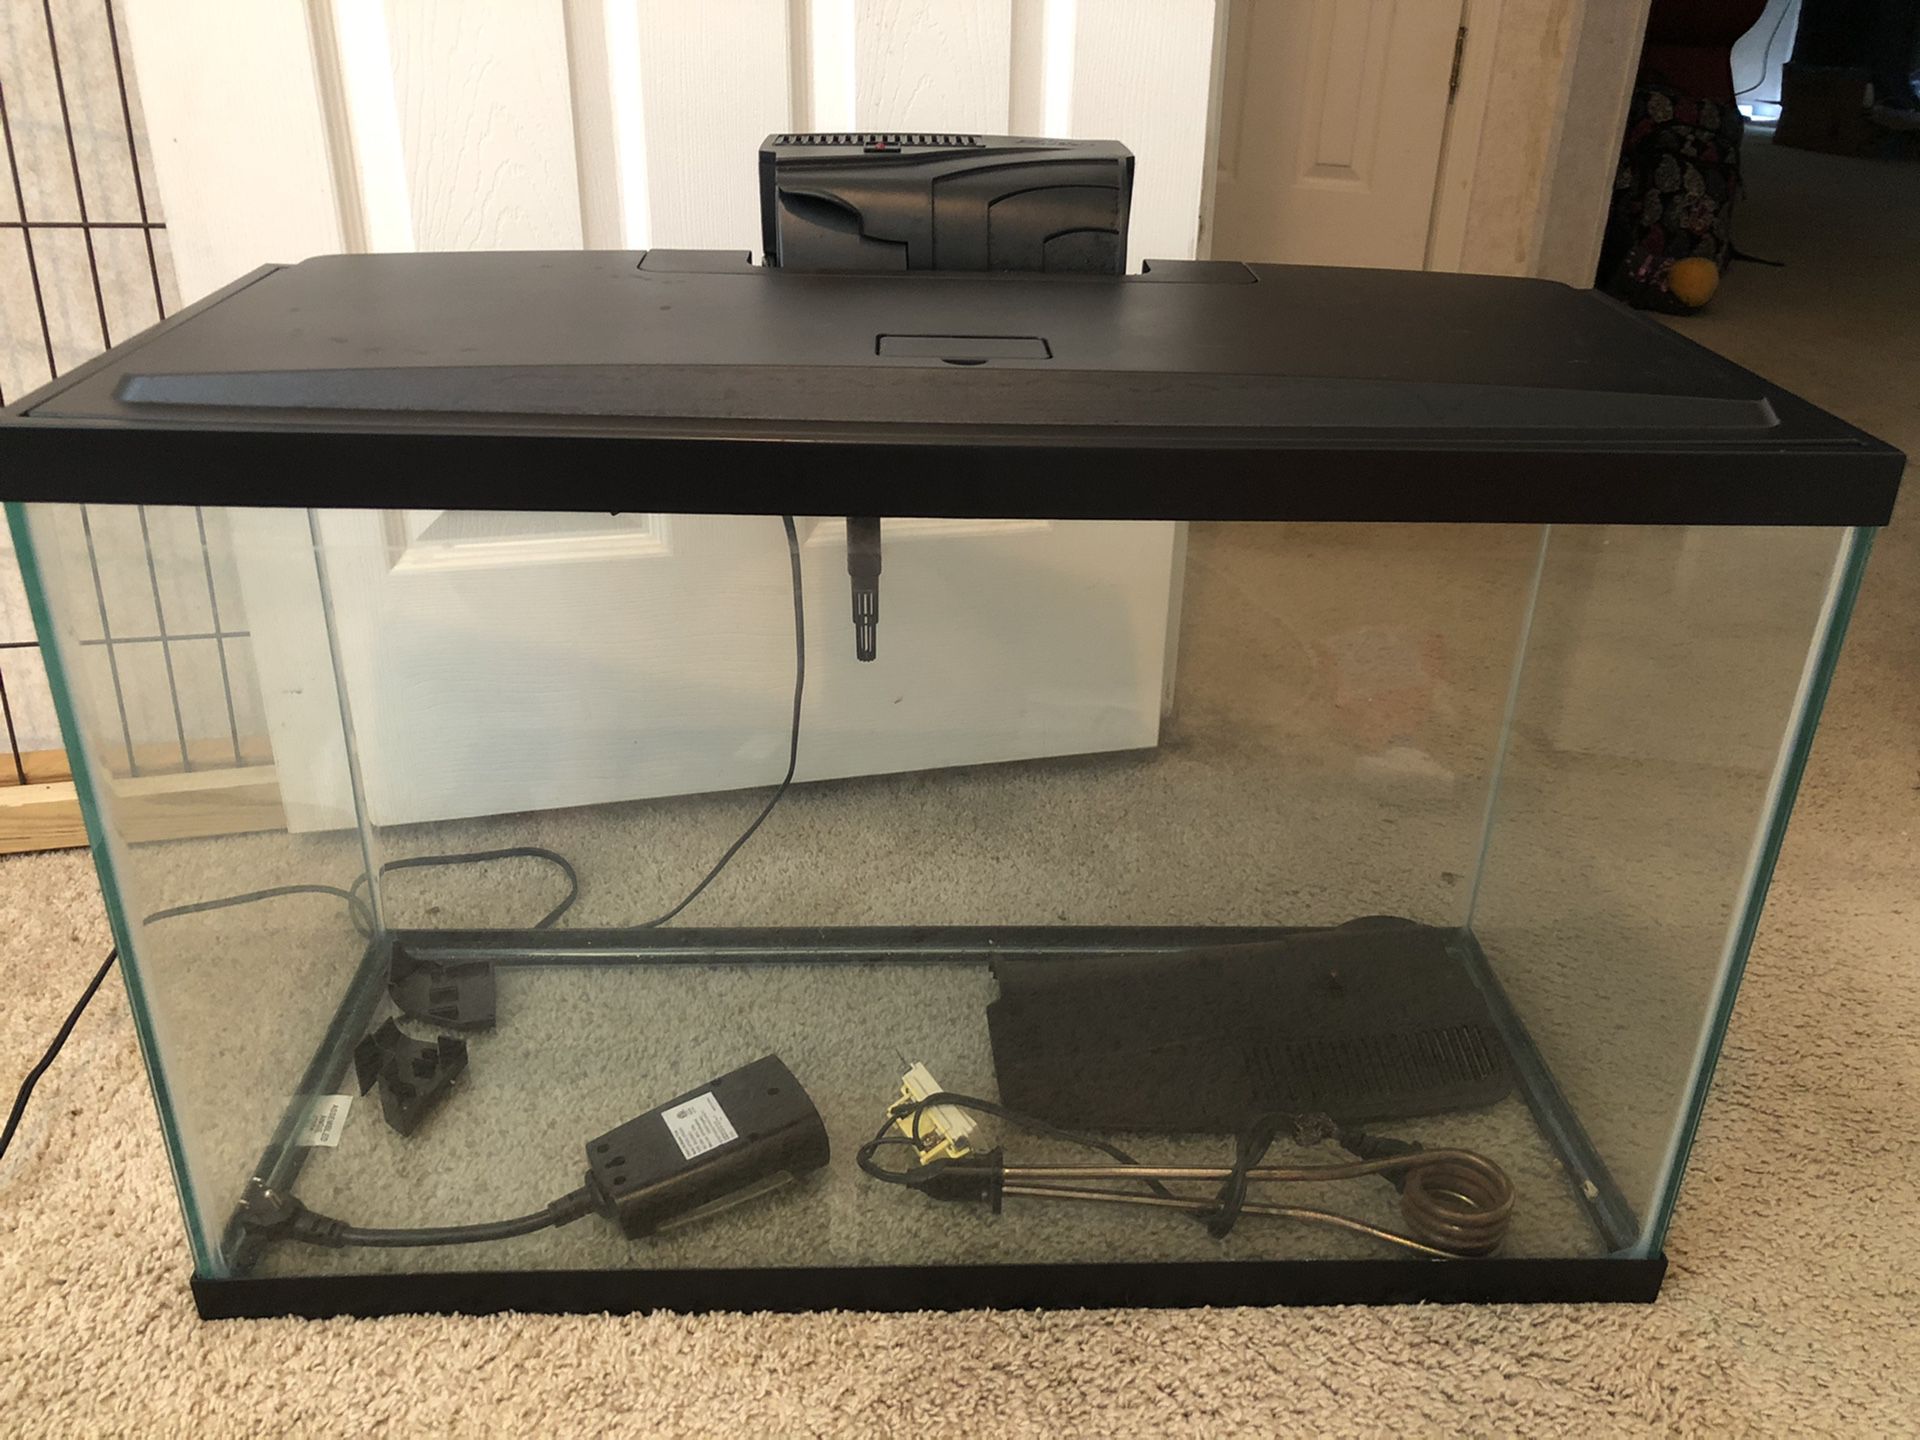 28 Gallon Fish tank with Aqueon Quiet Flow 30 Power Filter plus heater and timer